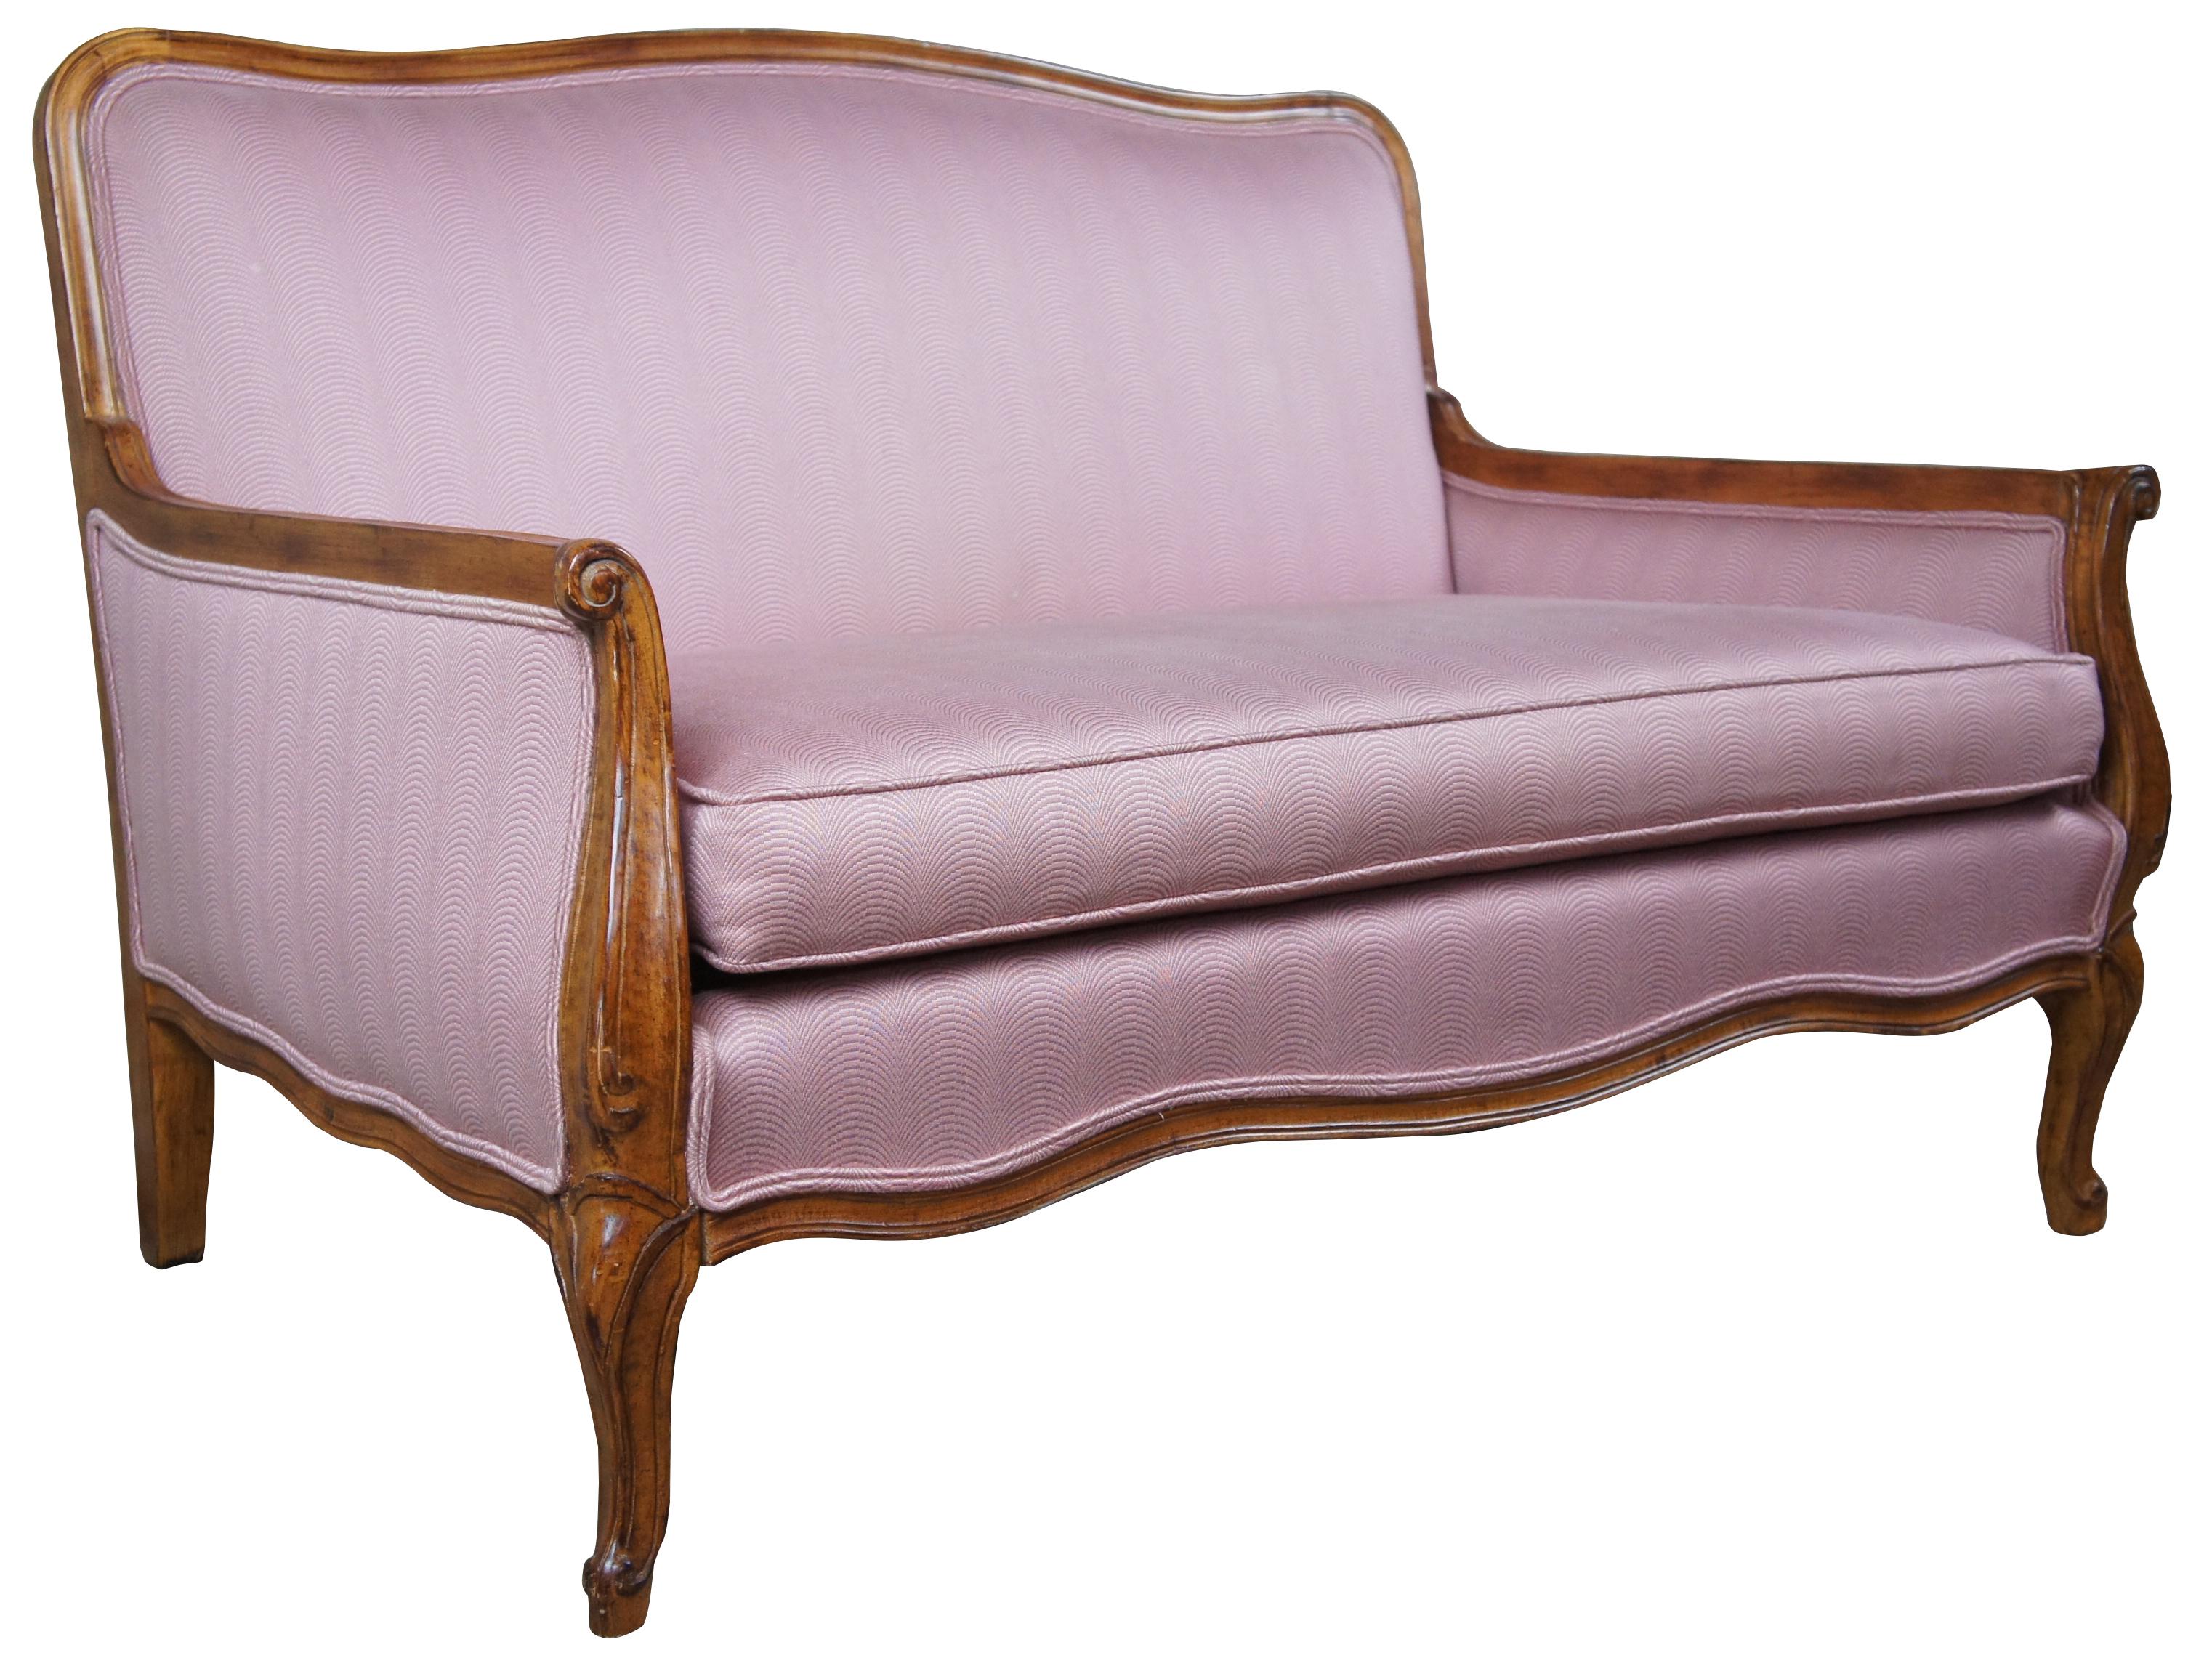 20th century country French camelback settee. Made from walnut scrolled and flared arms. Upholstered in pink. Measure: 46